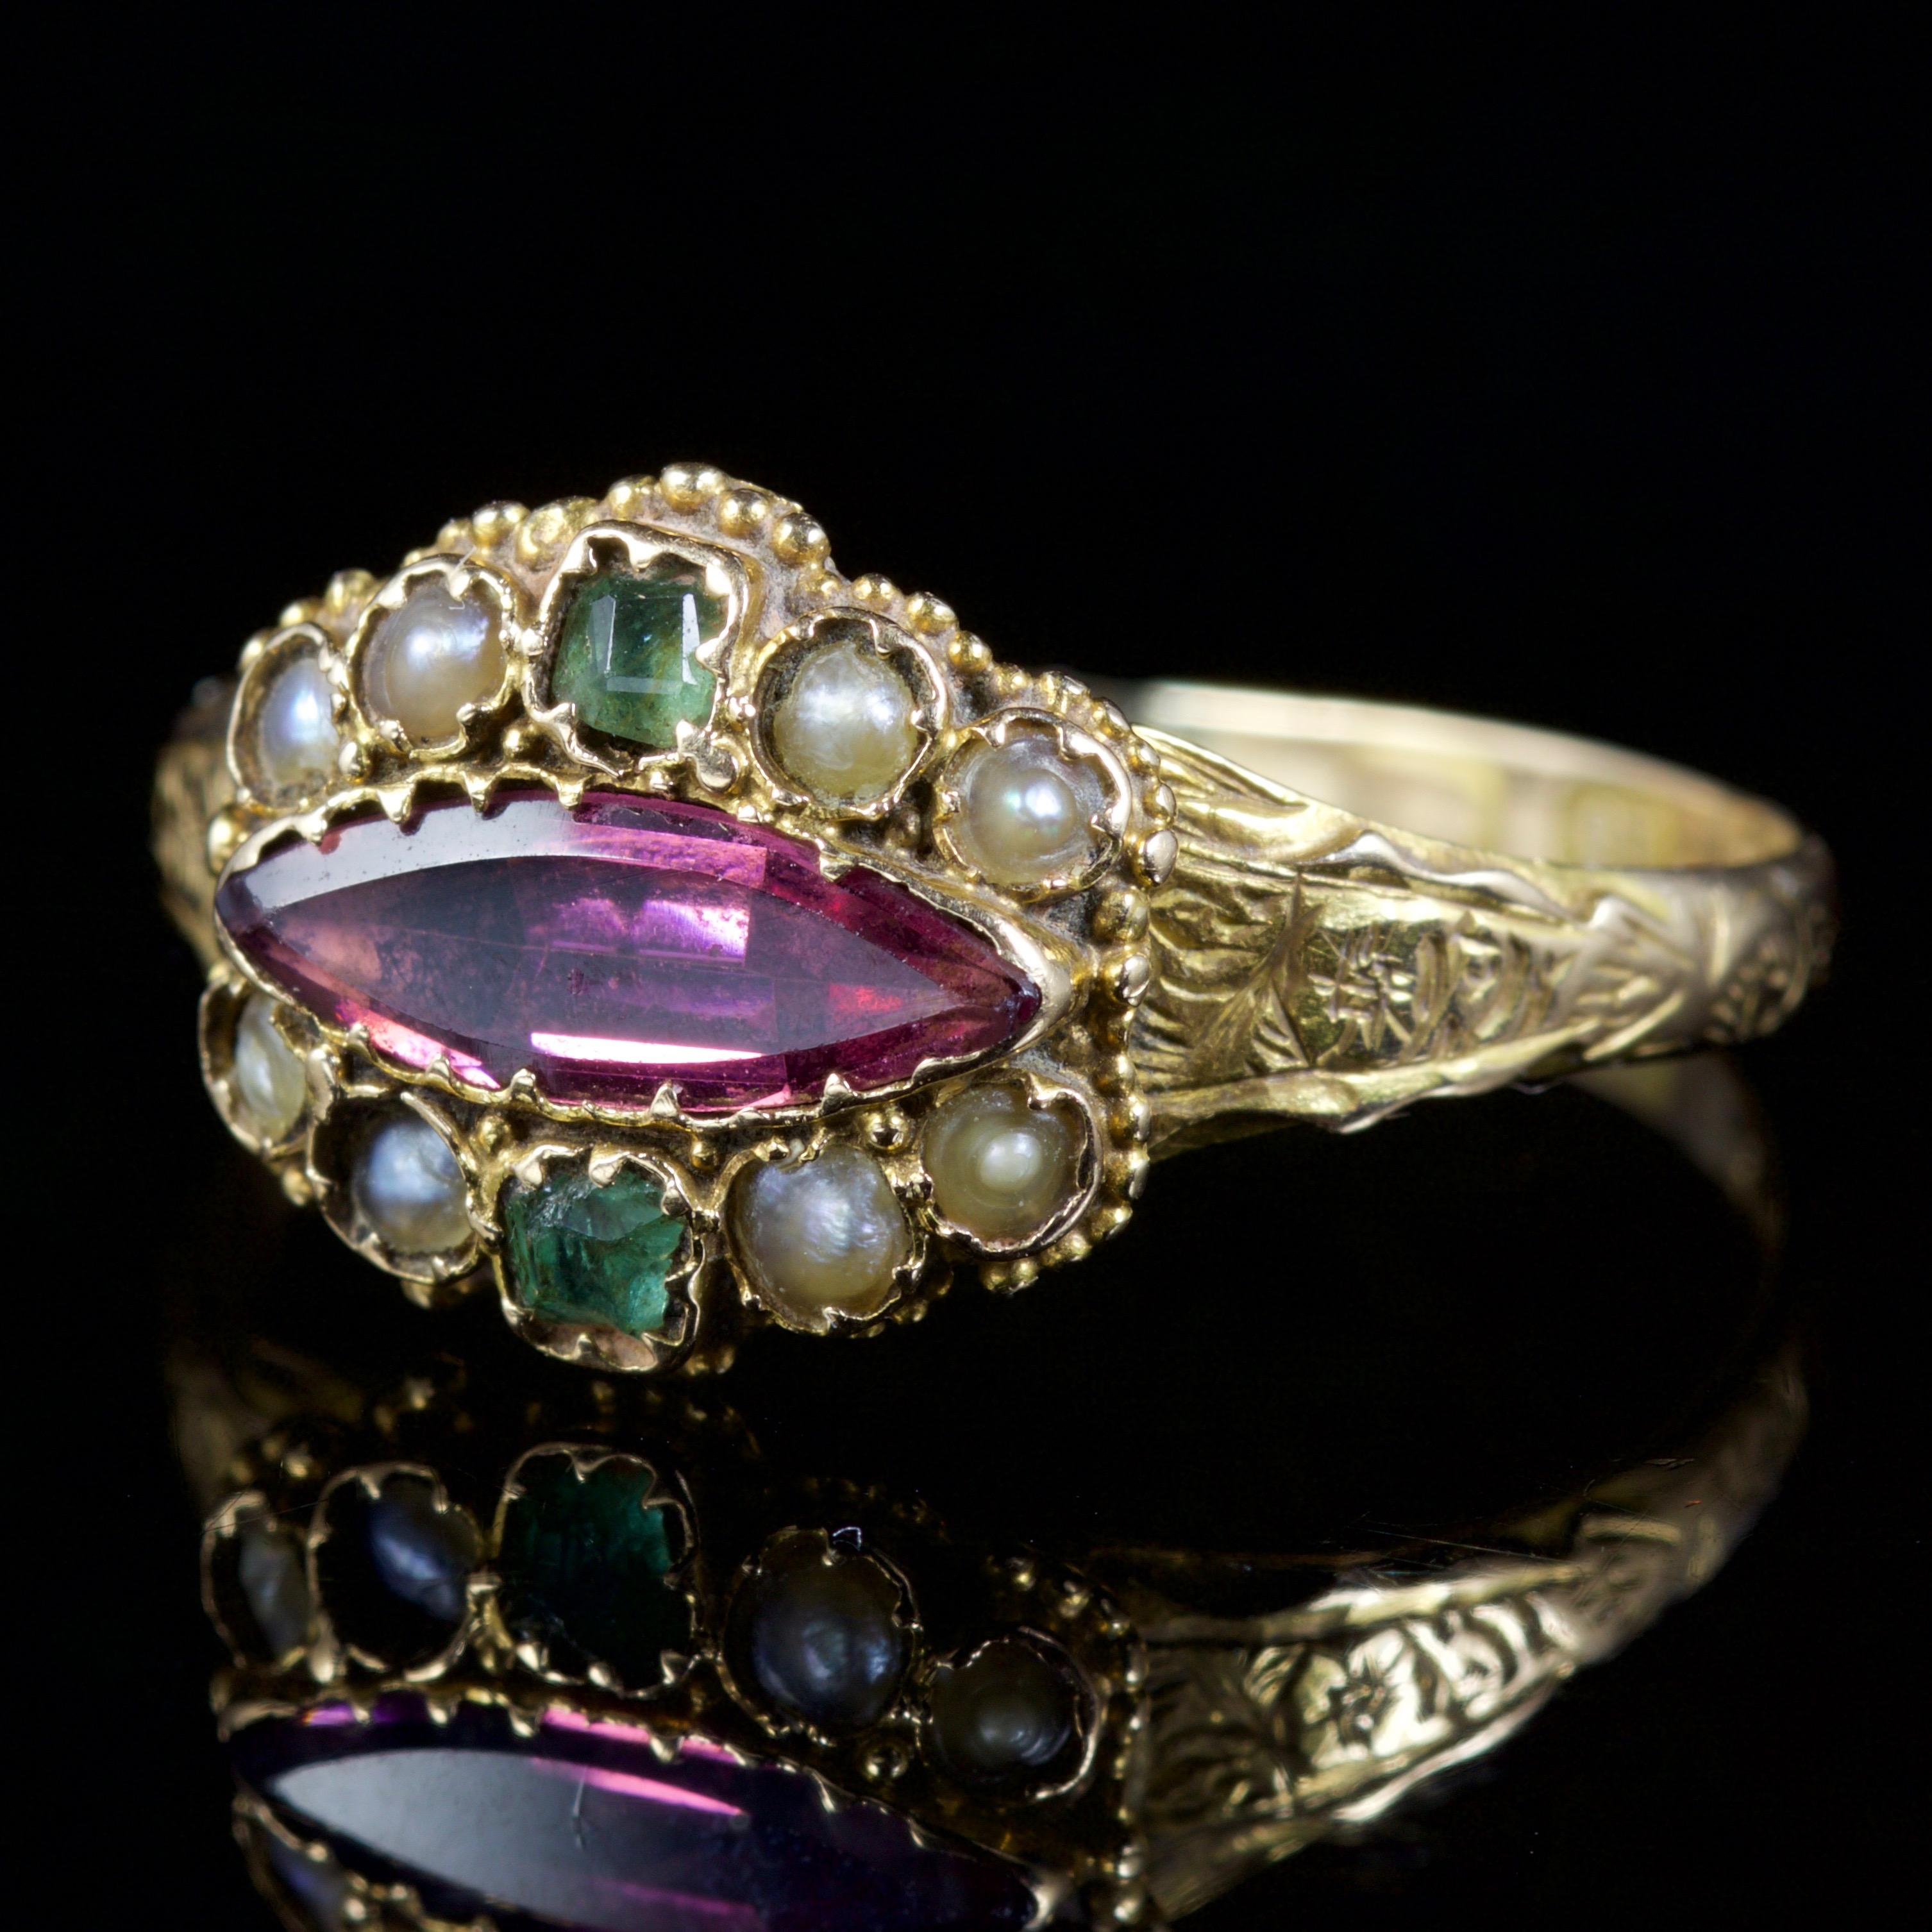 This adorable Victorian ring is set in 15ct Gold, Circa 1900.

The pink Tourmaline is set across the centre, this beautiful stone is 0.75ct.

The Tourmaline is surrounded by a halo of Pearls and Emeralds.

The combination of gemstones represent the